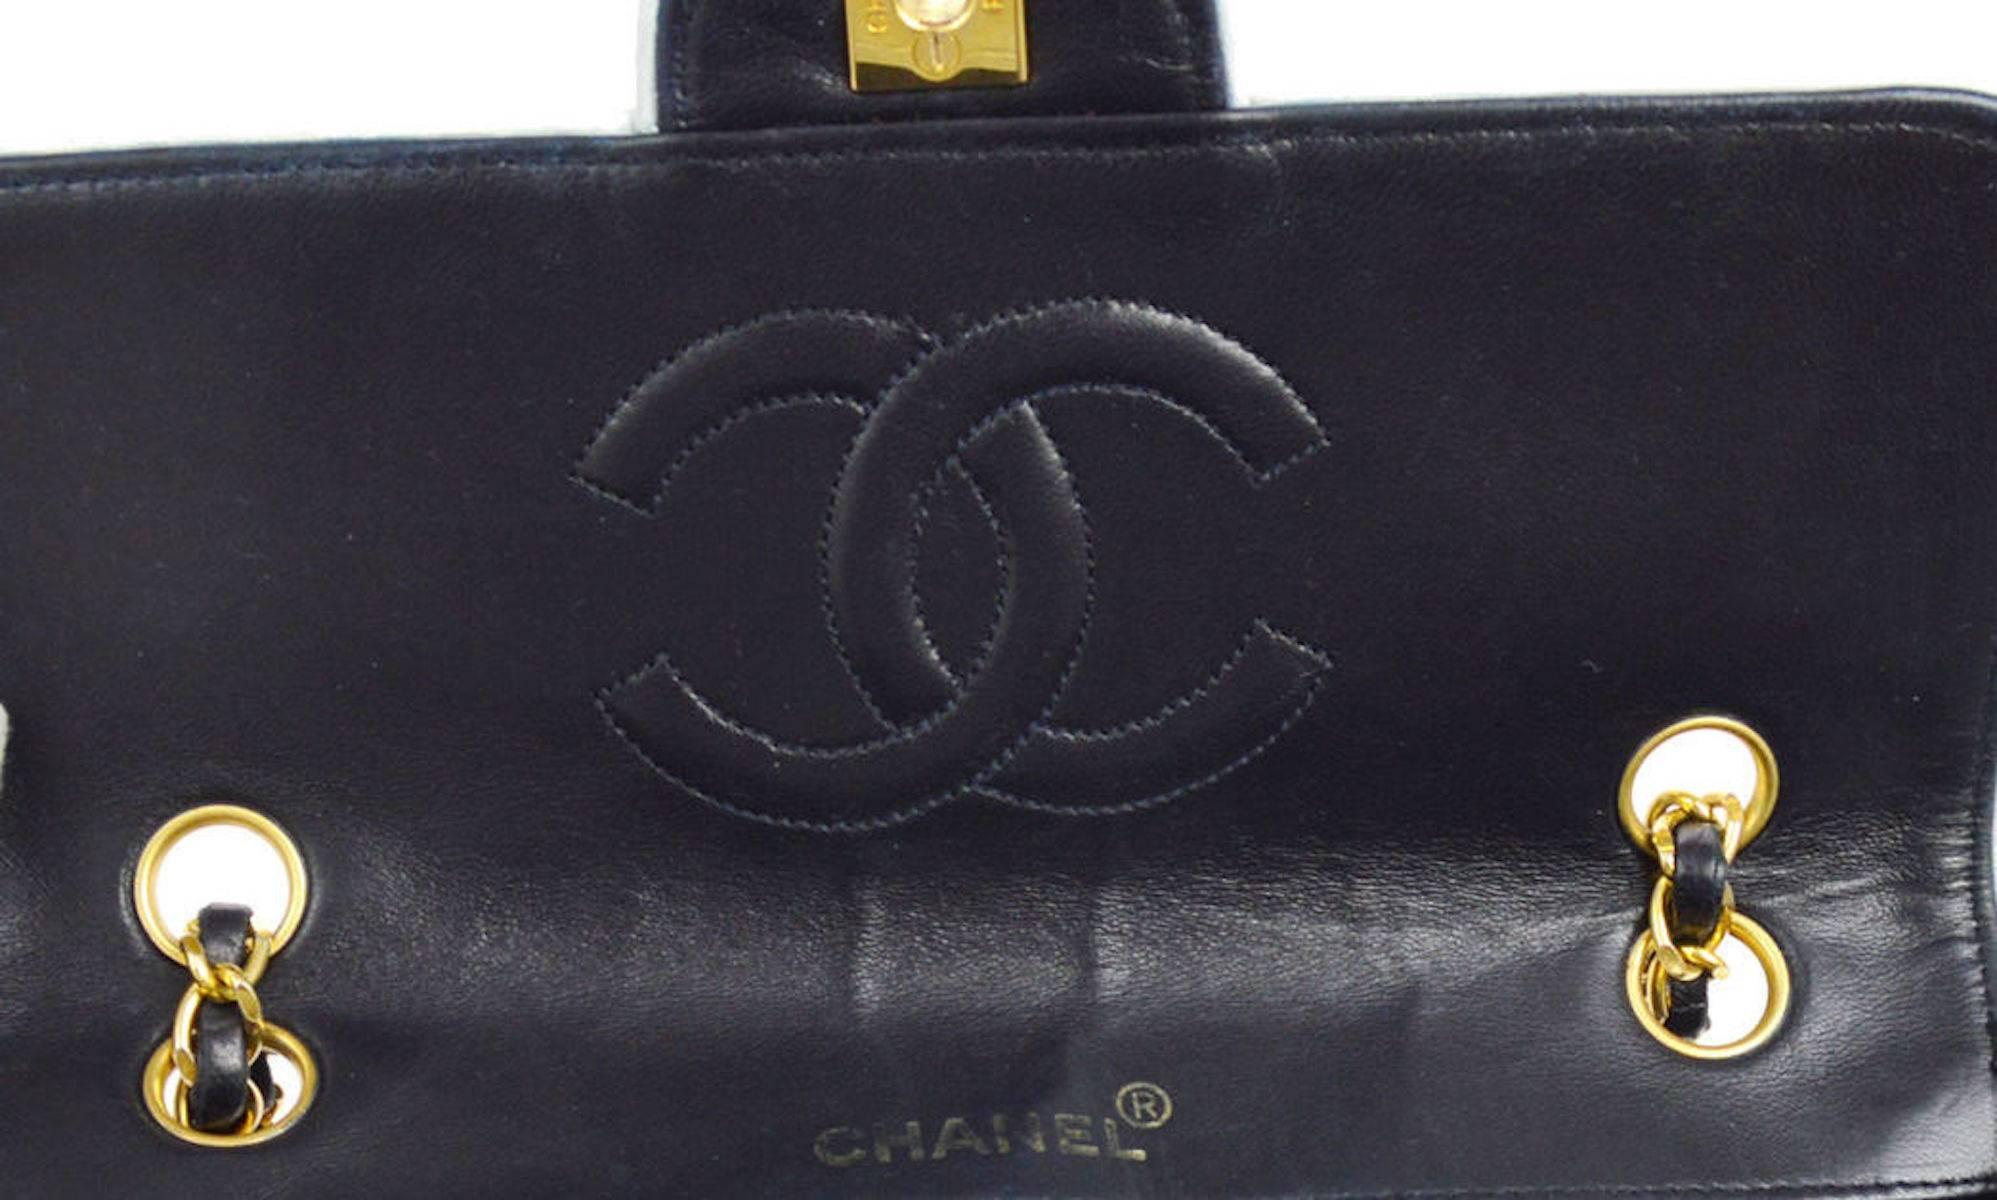 Chanel Vintage Two Tone White Piping Lambskin Leather Evening Clutch Flap Bag 1